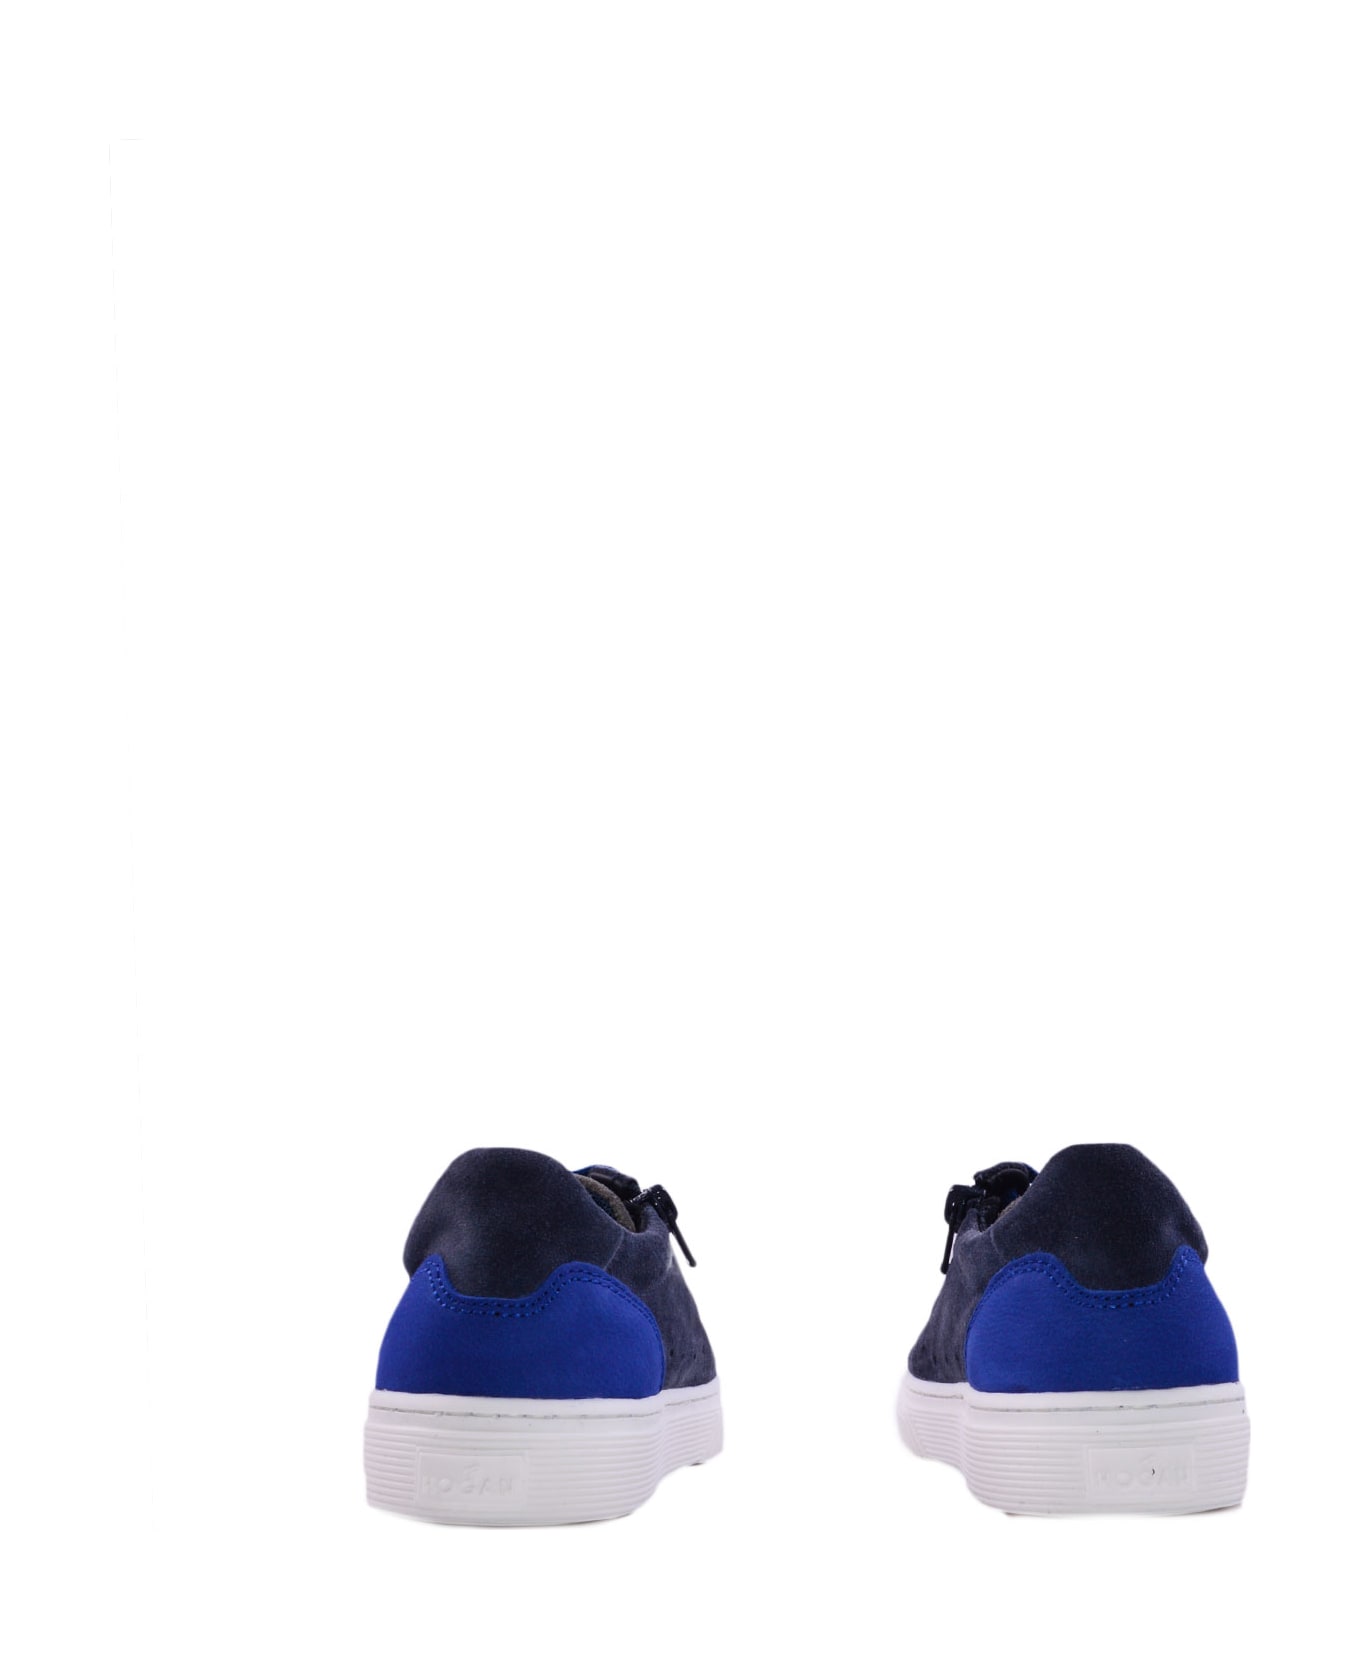 Hogan H365 Sneakers In Suede Leather - Blue